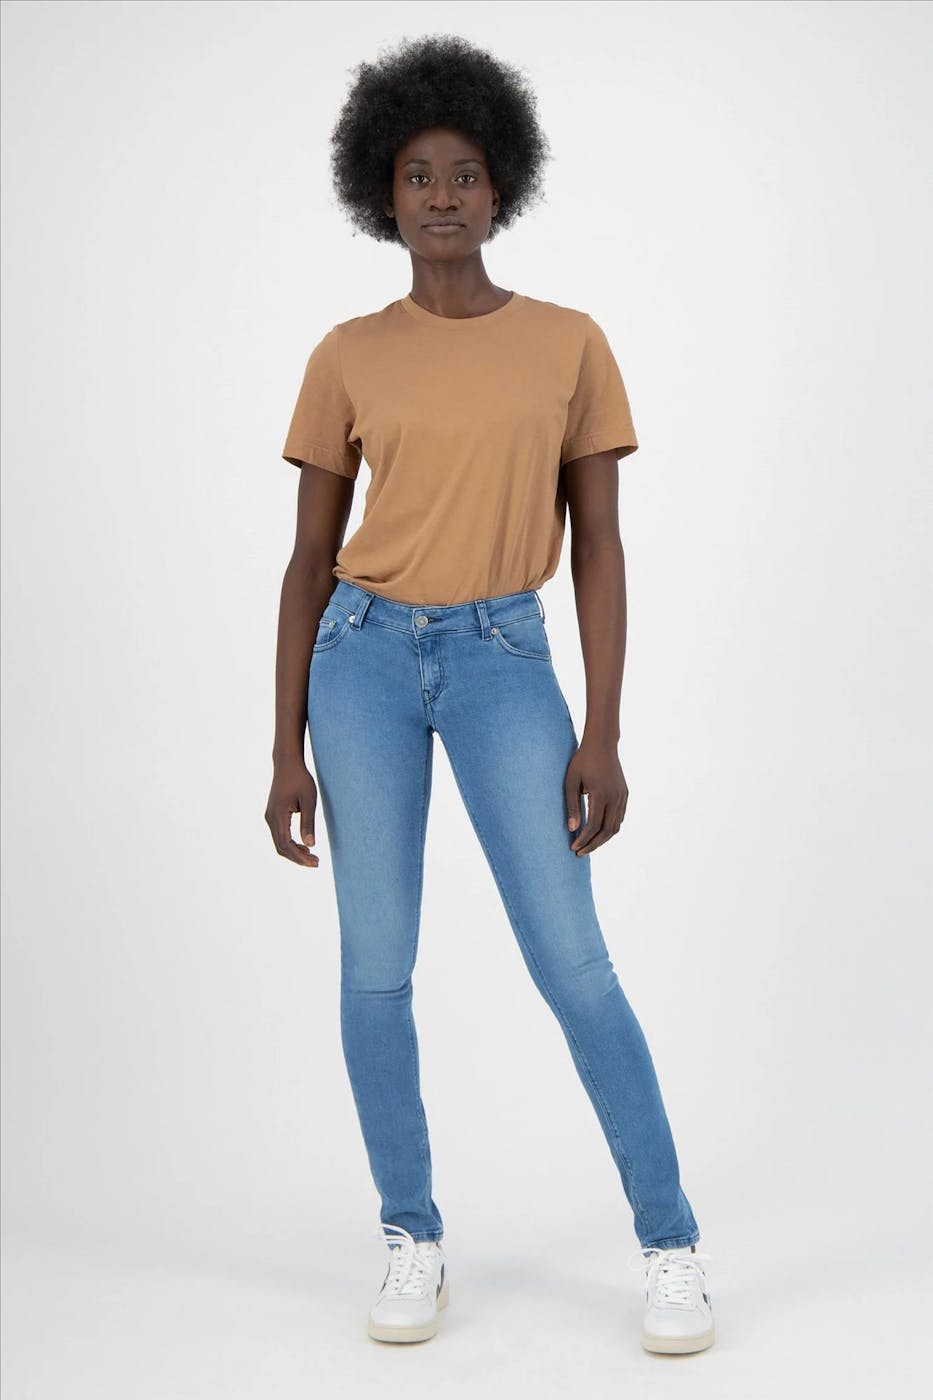 MUD jeans - Blauwe Skinny Lilly jeans